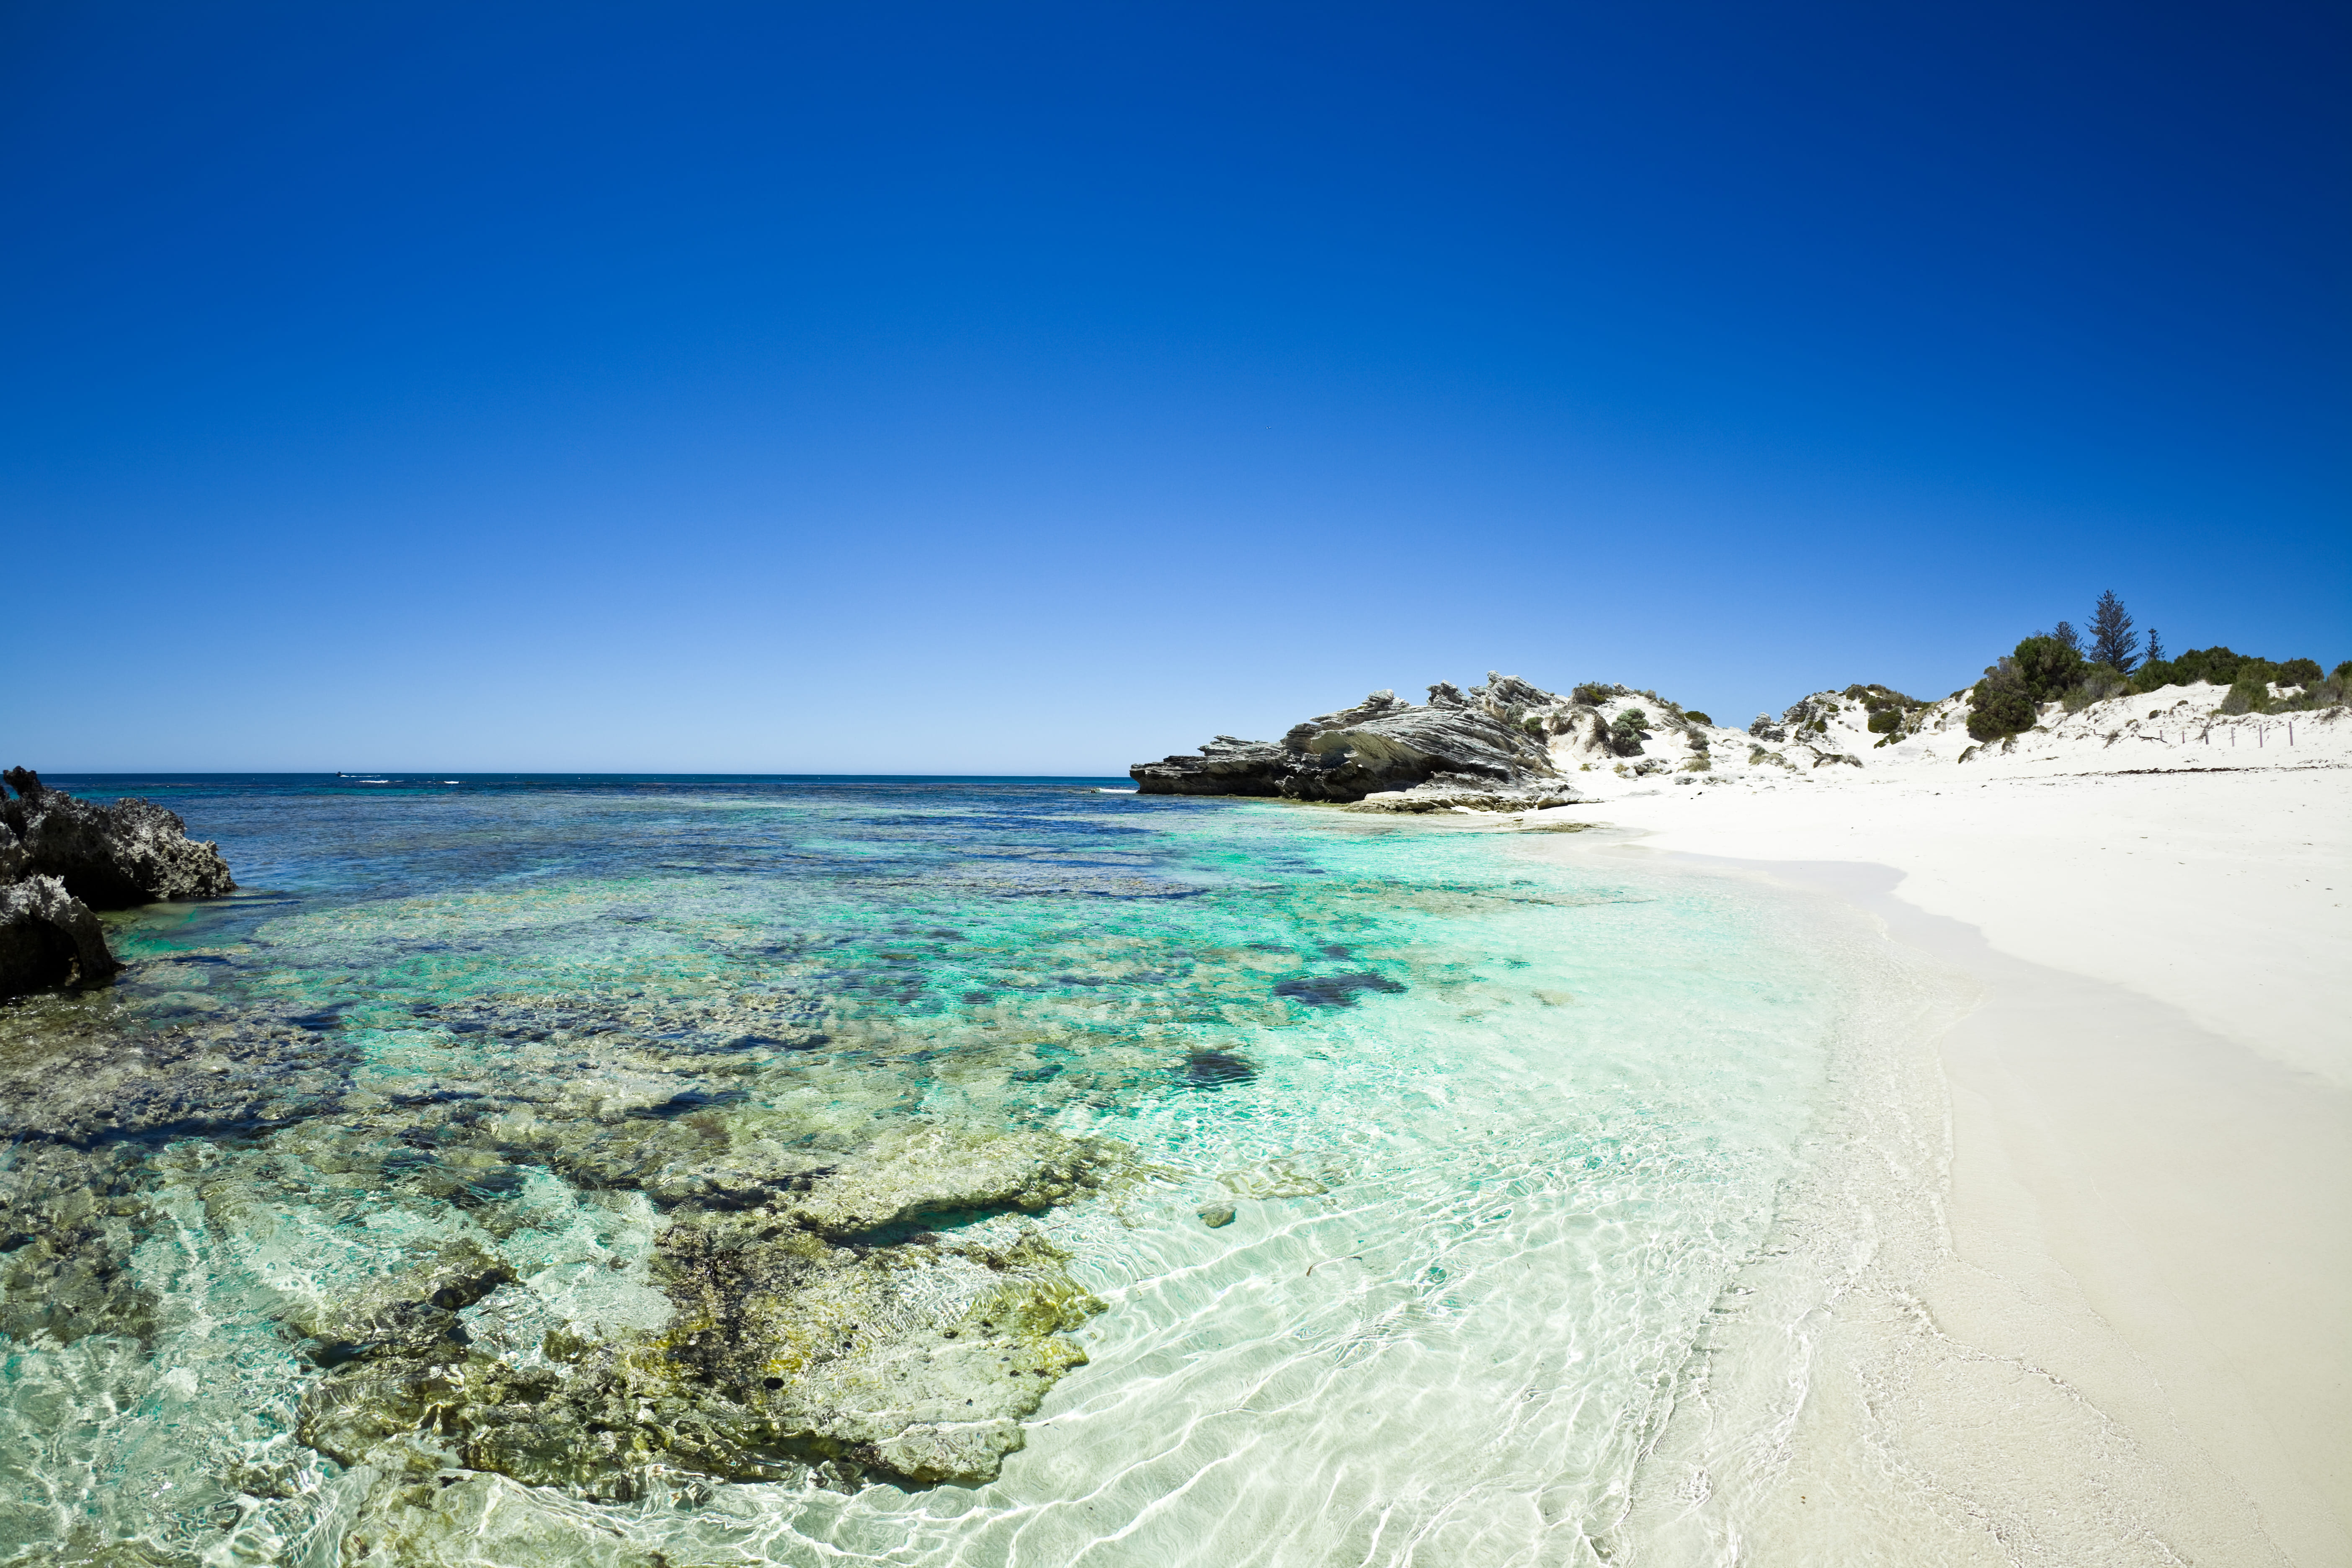 Take advantage of the pristine beaches when you move from Adelaide to Perth with Richard Mitchell Removalists